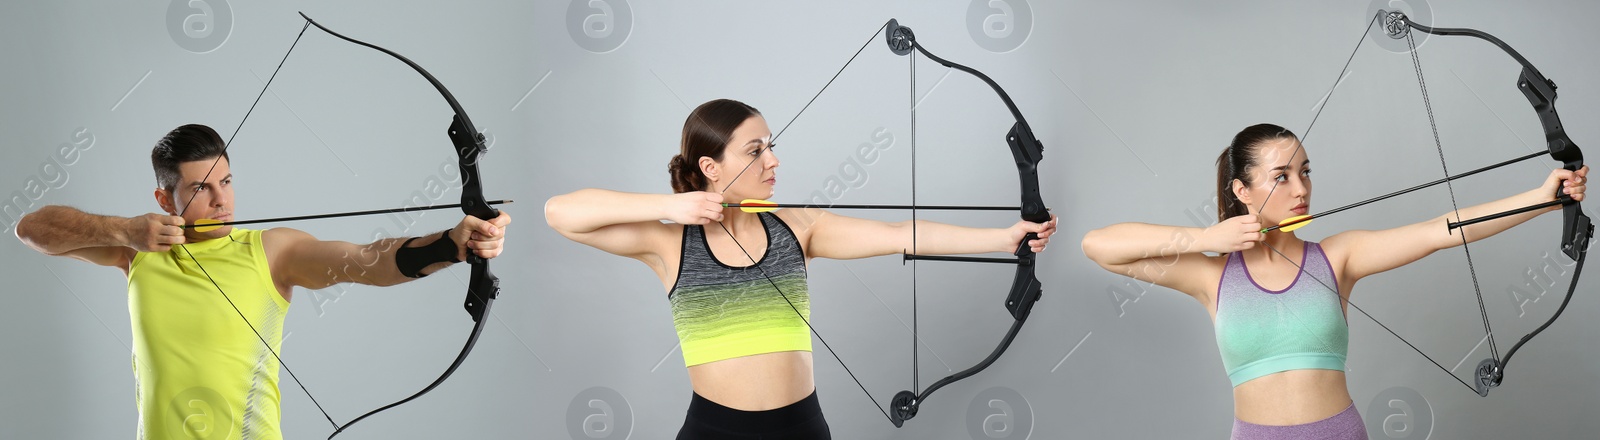 Image of People practicing archery on grey background, collage. Banner design